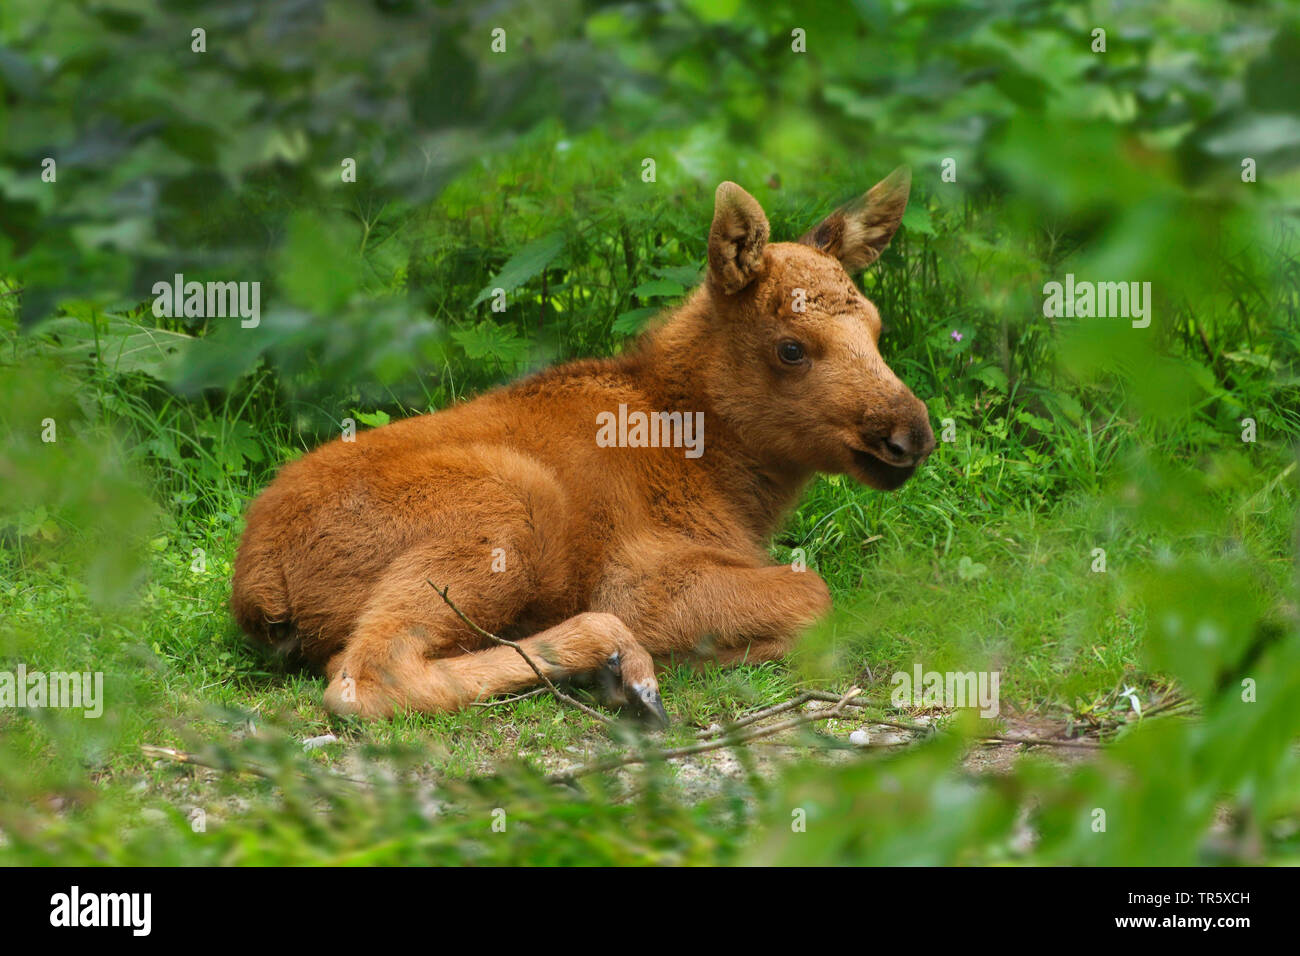 elk, European moose (Alces alces alces), pup lying on a clearing Stock Photo